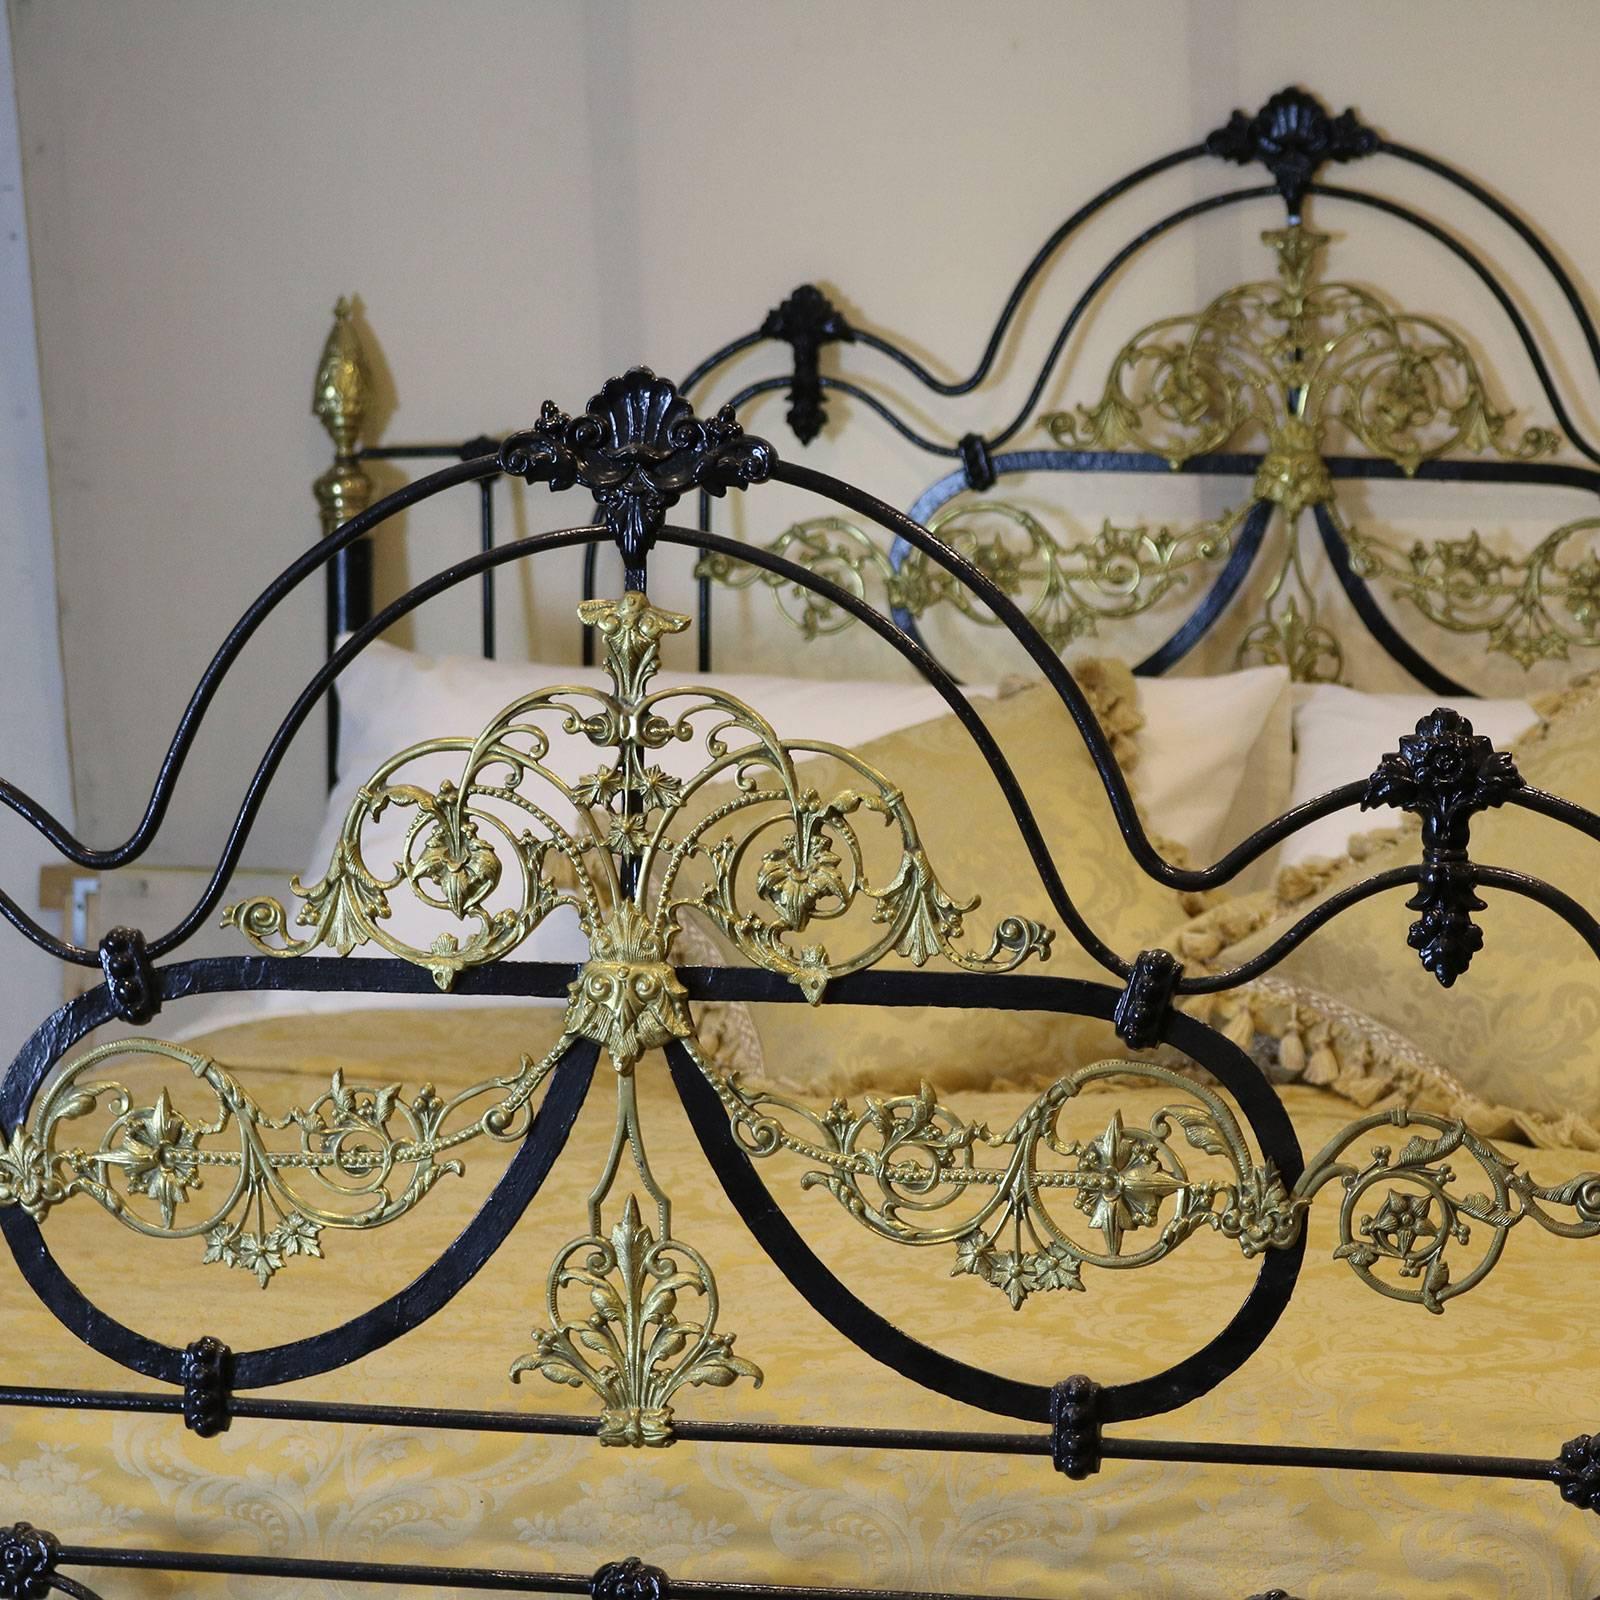 Wide Decorative Cast Iron Bed - MSK28 1